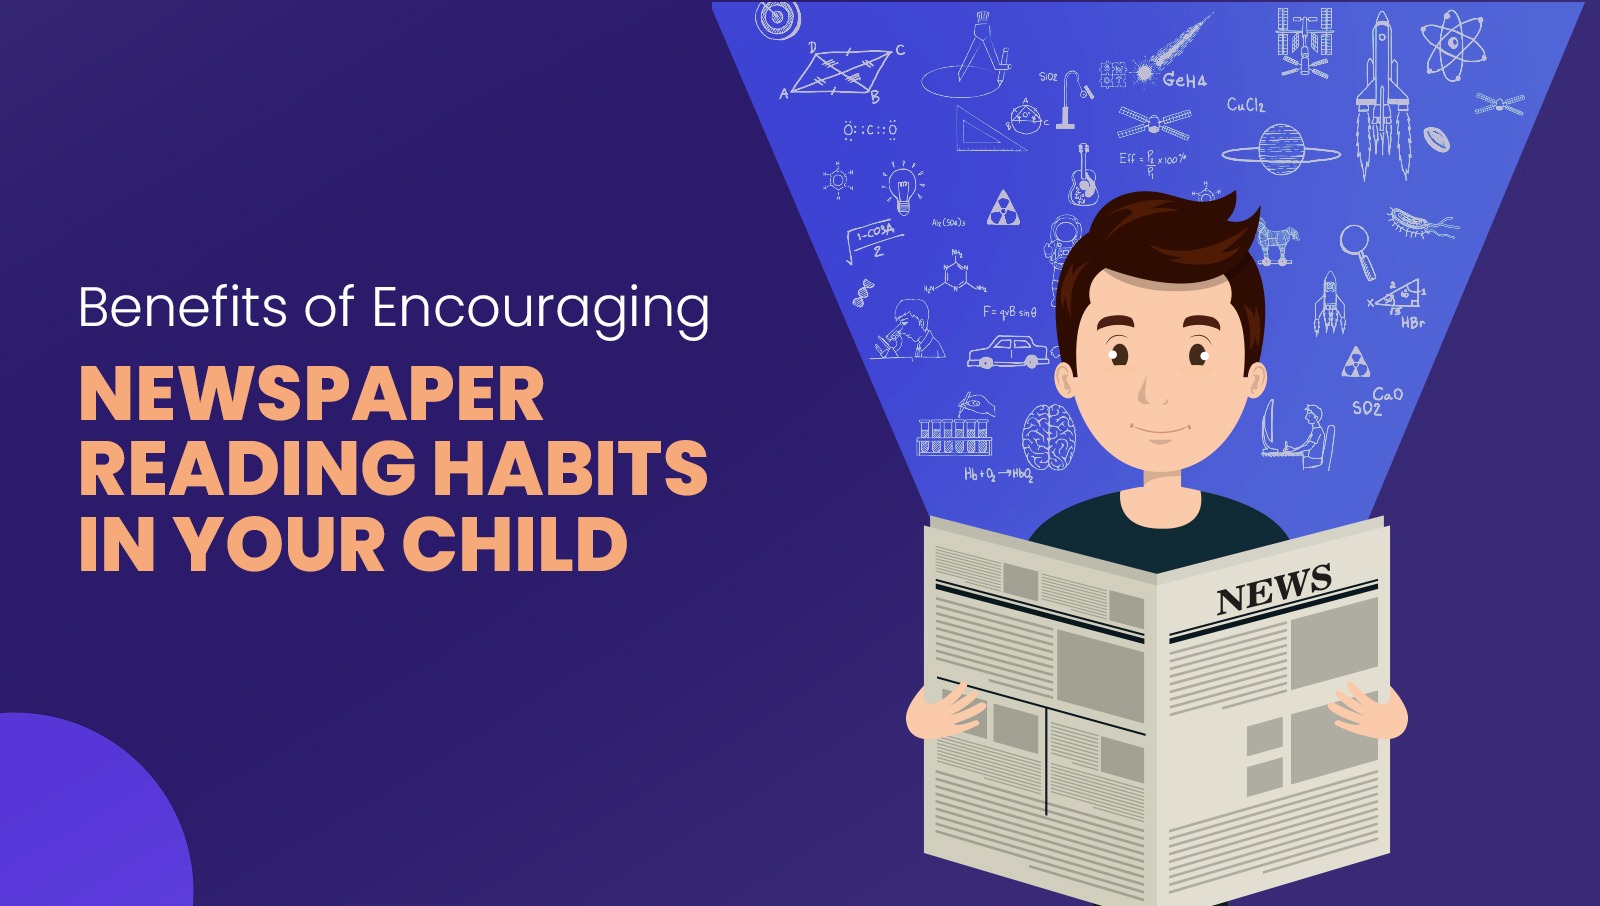 BENEFITS OF ENCOURAGING NEWSPAPER READING HABITS IN YOUR CHILD